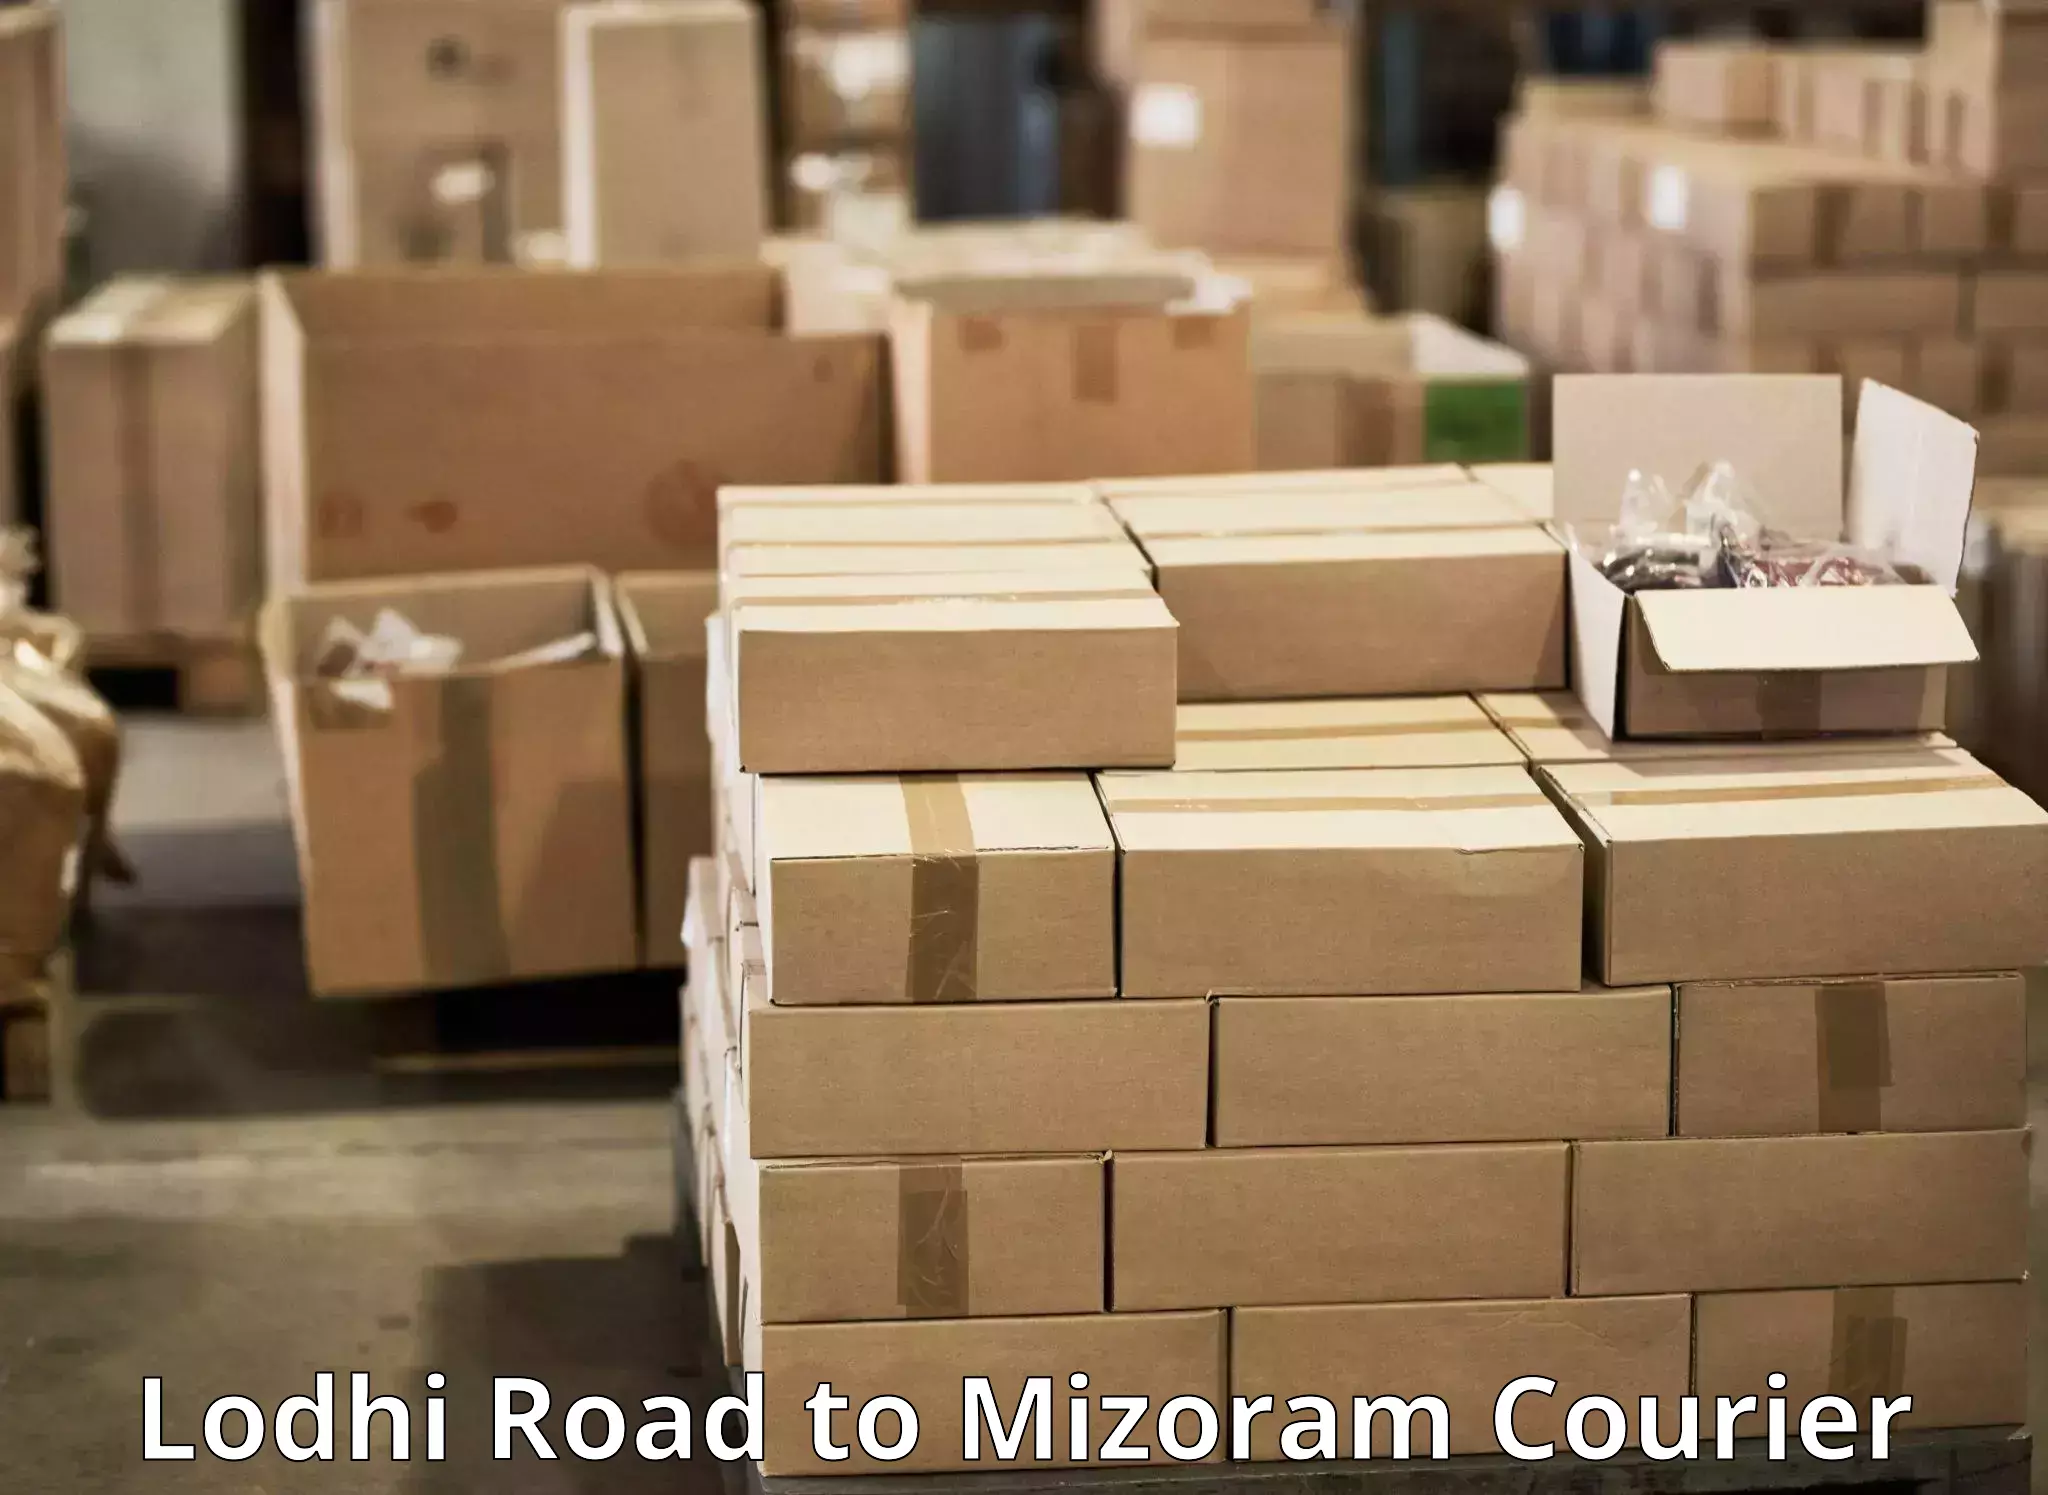 Delivery service partnership in Lodhi Road to Mizoram